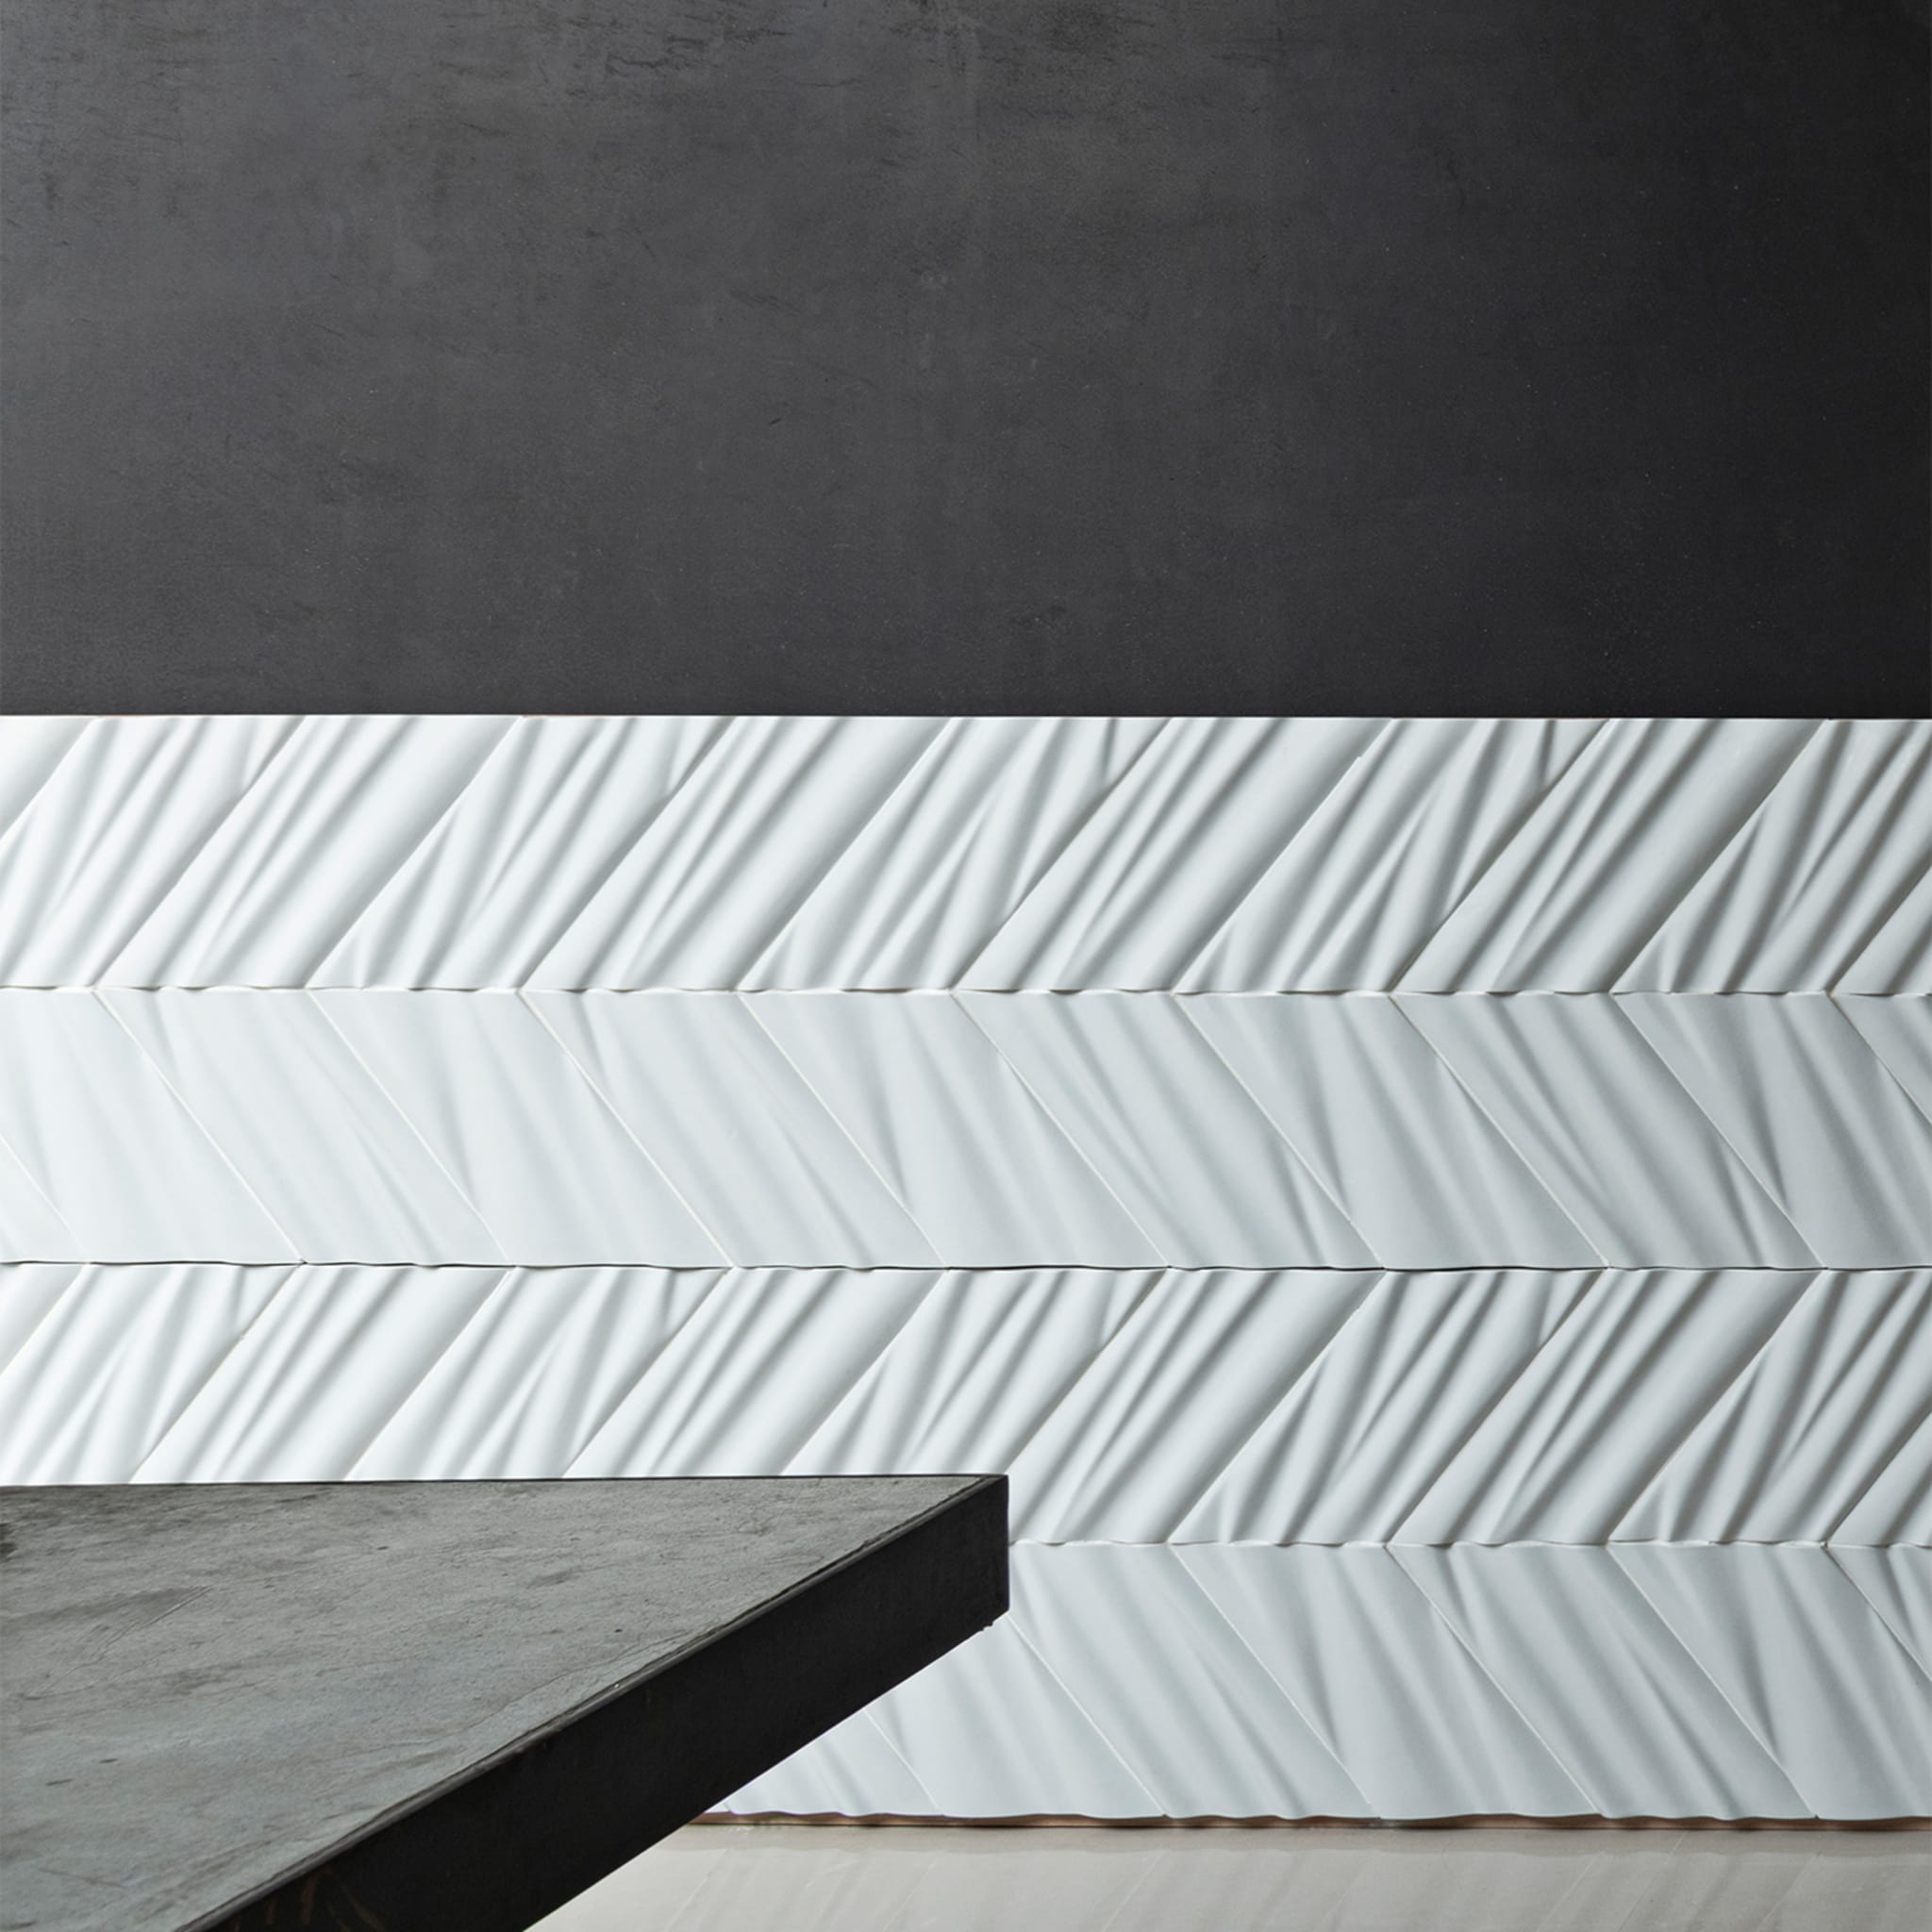 Calipso Smooth White Wall Covering by Giacomo Totti - Alternative view 1